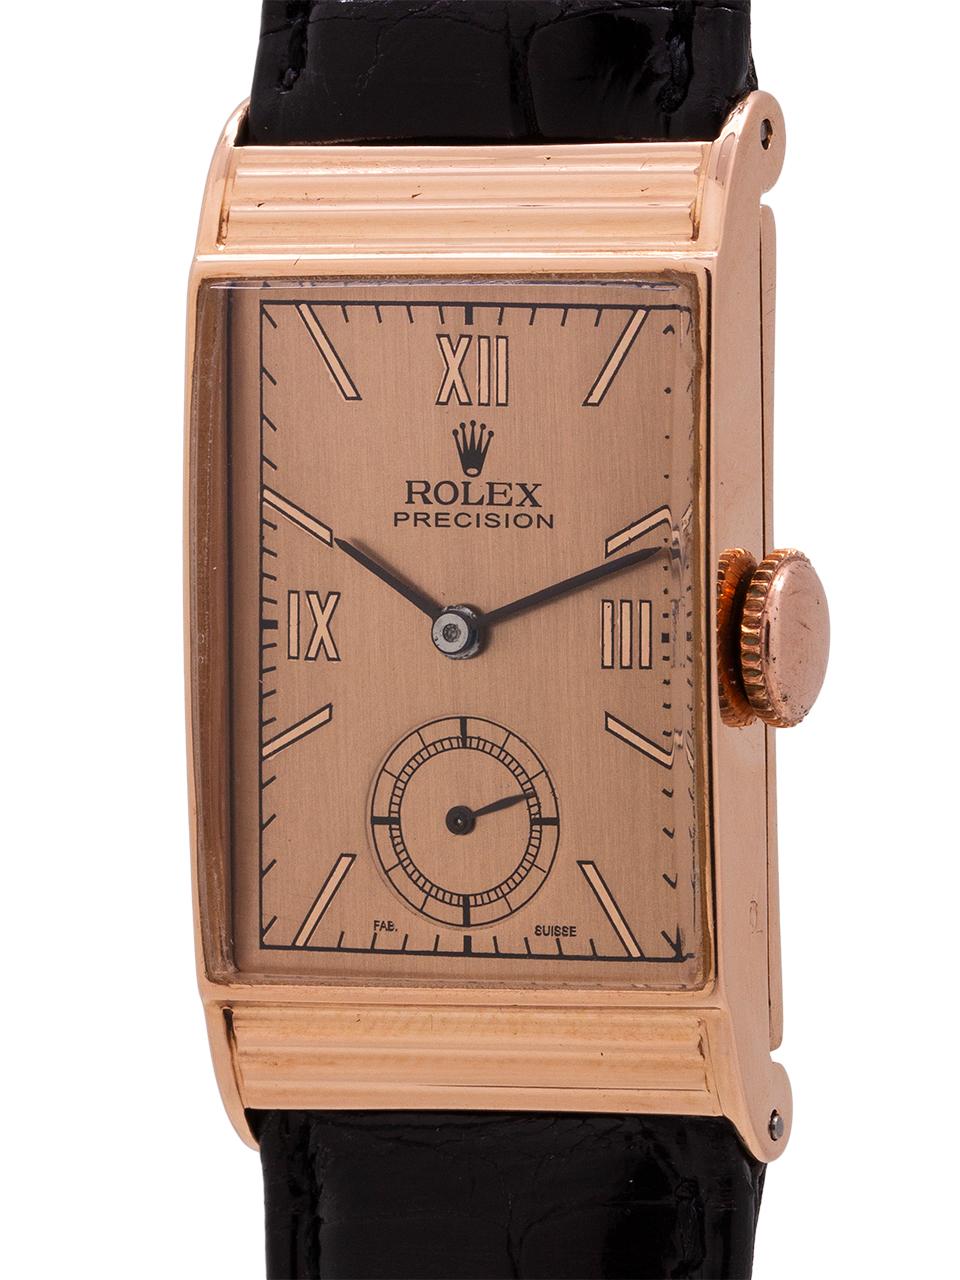 
Vintage Rolex Precision man’s 14K PG manual wind dress model ref 4010 circa 1940’s. Featuring a 20 x 33mm rectangular case with styliized ribbed hooded lug design and beautifully restored antique salmon dial with mirror rose Roman indexes and